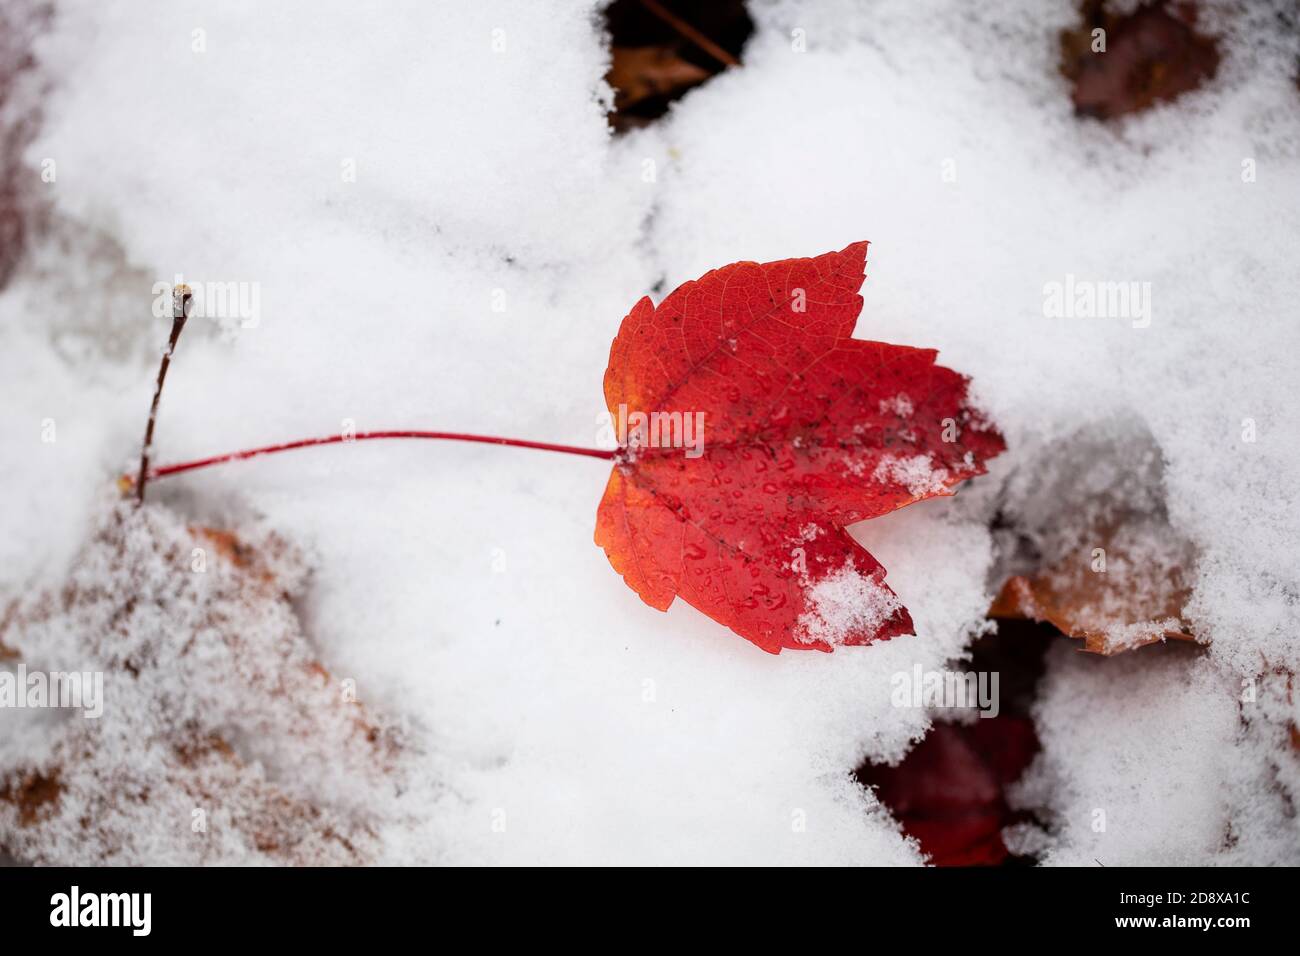 A red maple (acer) leaf lying on the ground covered in October snow in Westford, Massachusetts, USA. Stock Photo